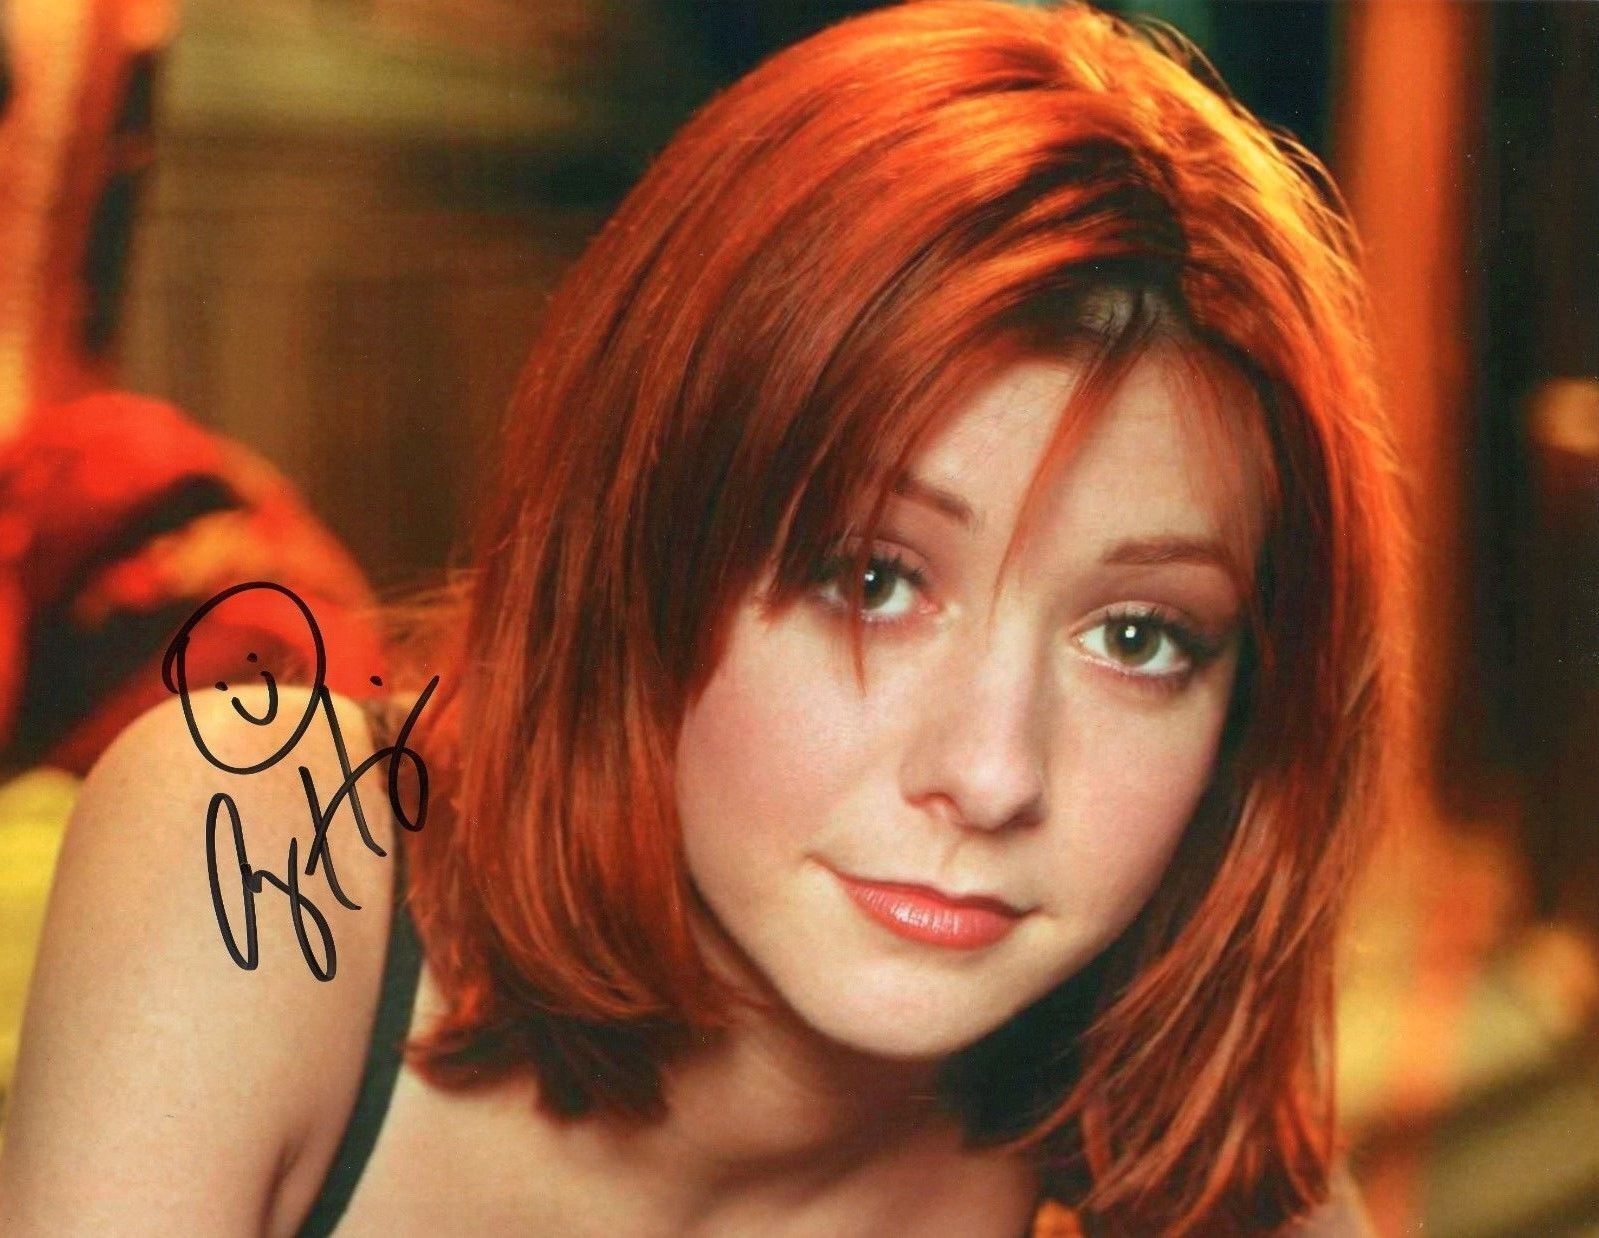 ALYSON HANNIGAN AUTOGRAPHED SIGNED A4 PP POSTER Photo Poster painting PRINT 11